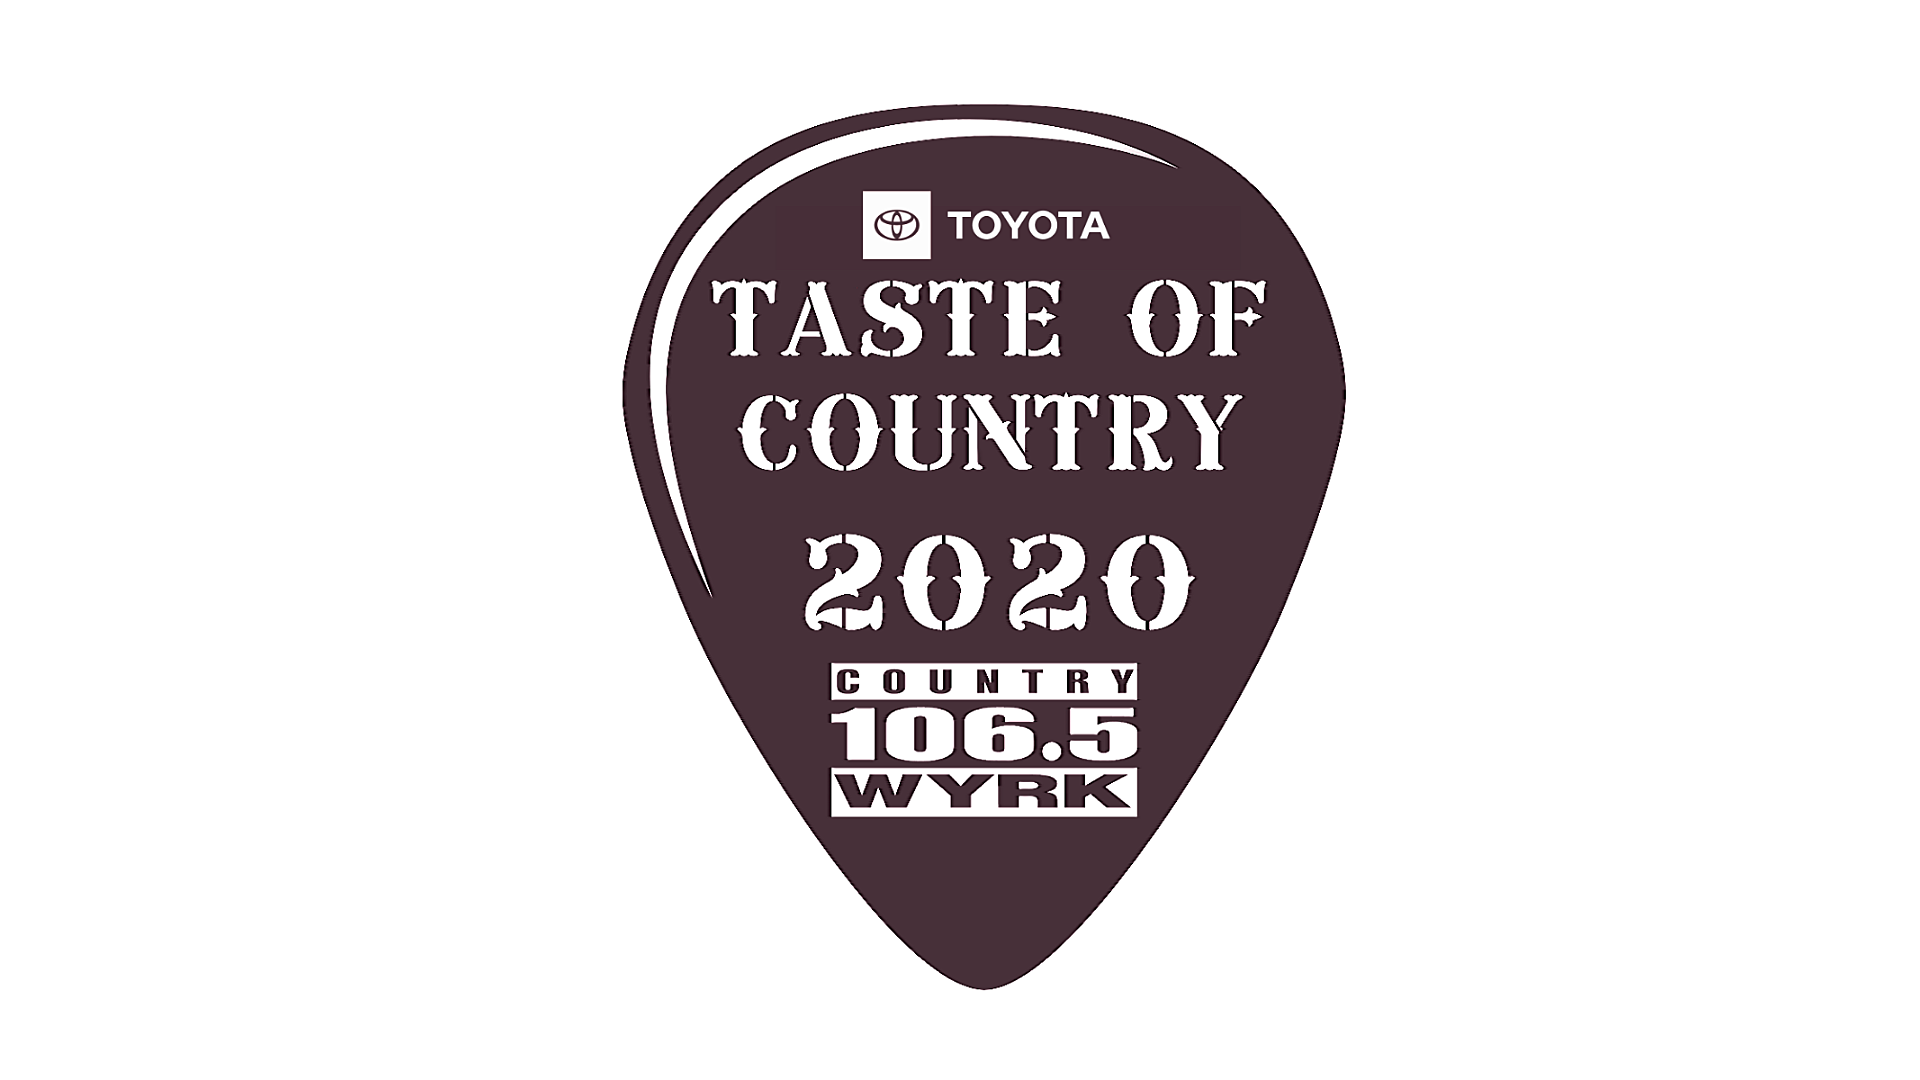 Toyota Taste Of Country 2020 Tickets On Sale Now